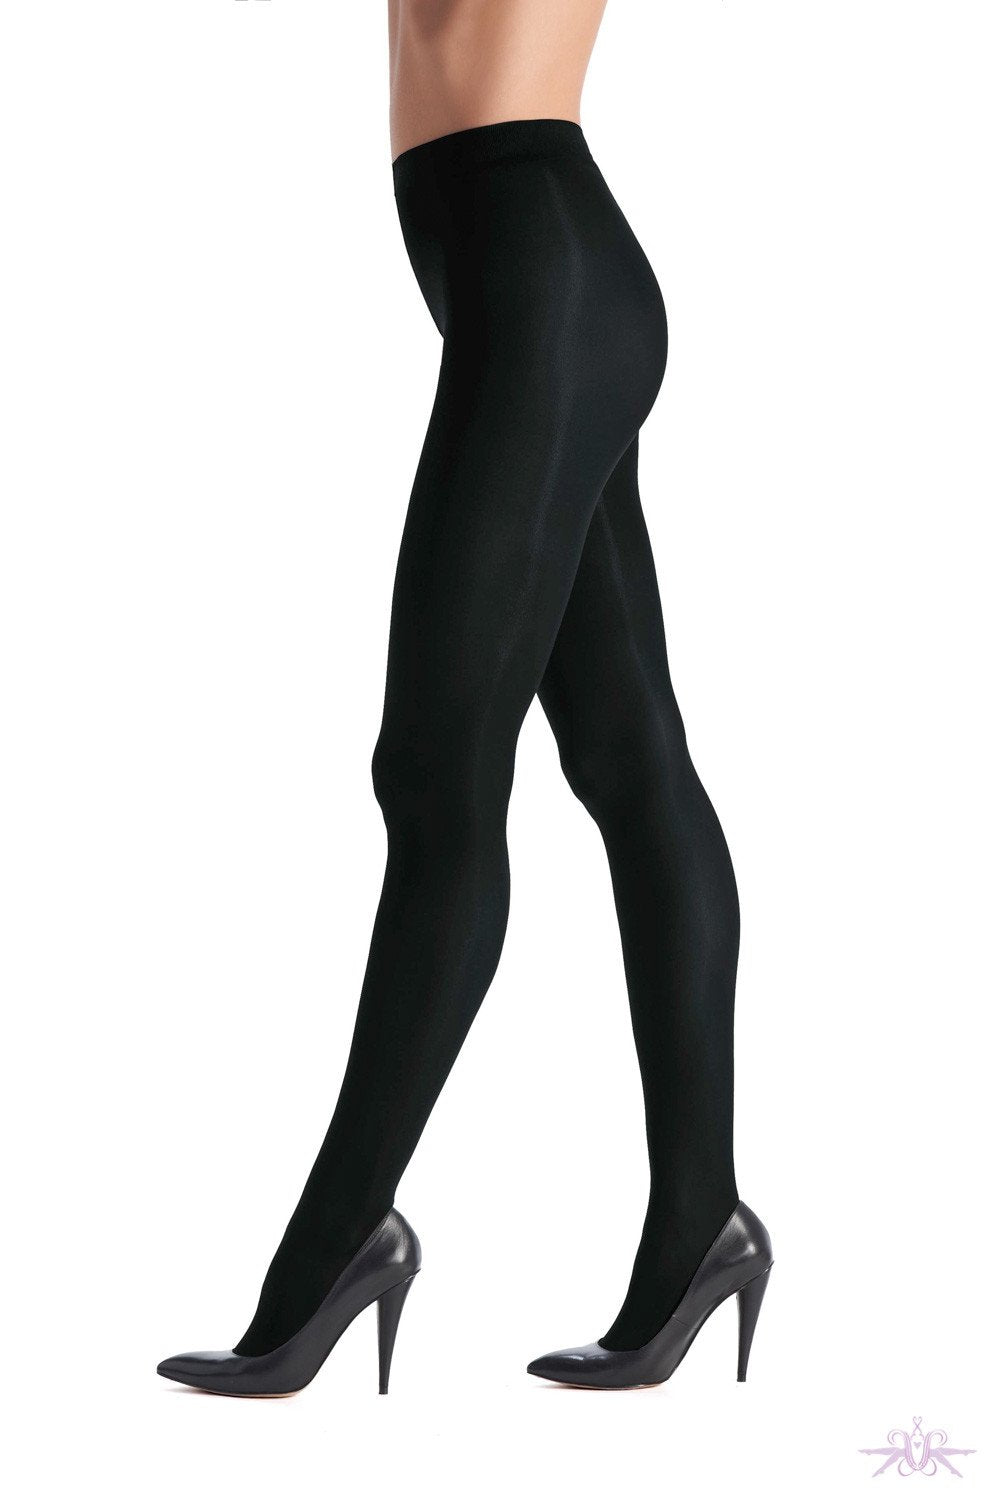 Couture 60 Denier Opaque Tights at the Hosiery Box Opaque Tights